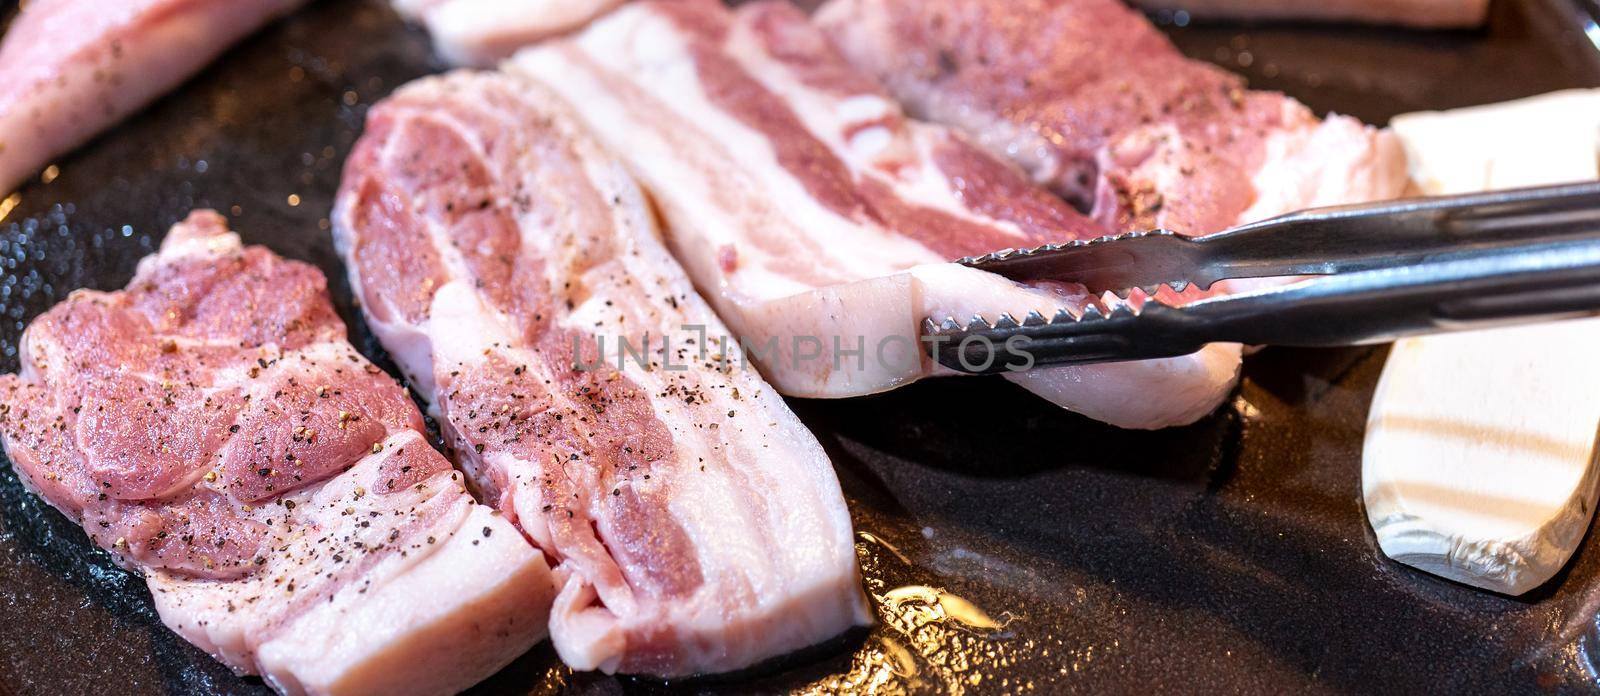 Pan-fried black pork meal in Korea restaurant, fresh delicious korean food cuisine on iron plate with lettuce, close up, copy space, lifestyle by ROMIXIMAGE